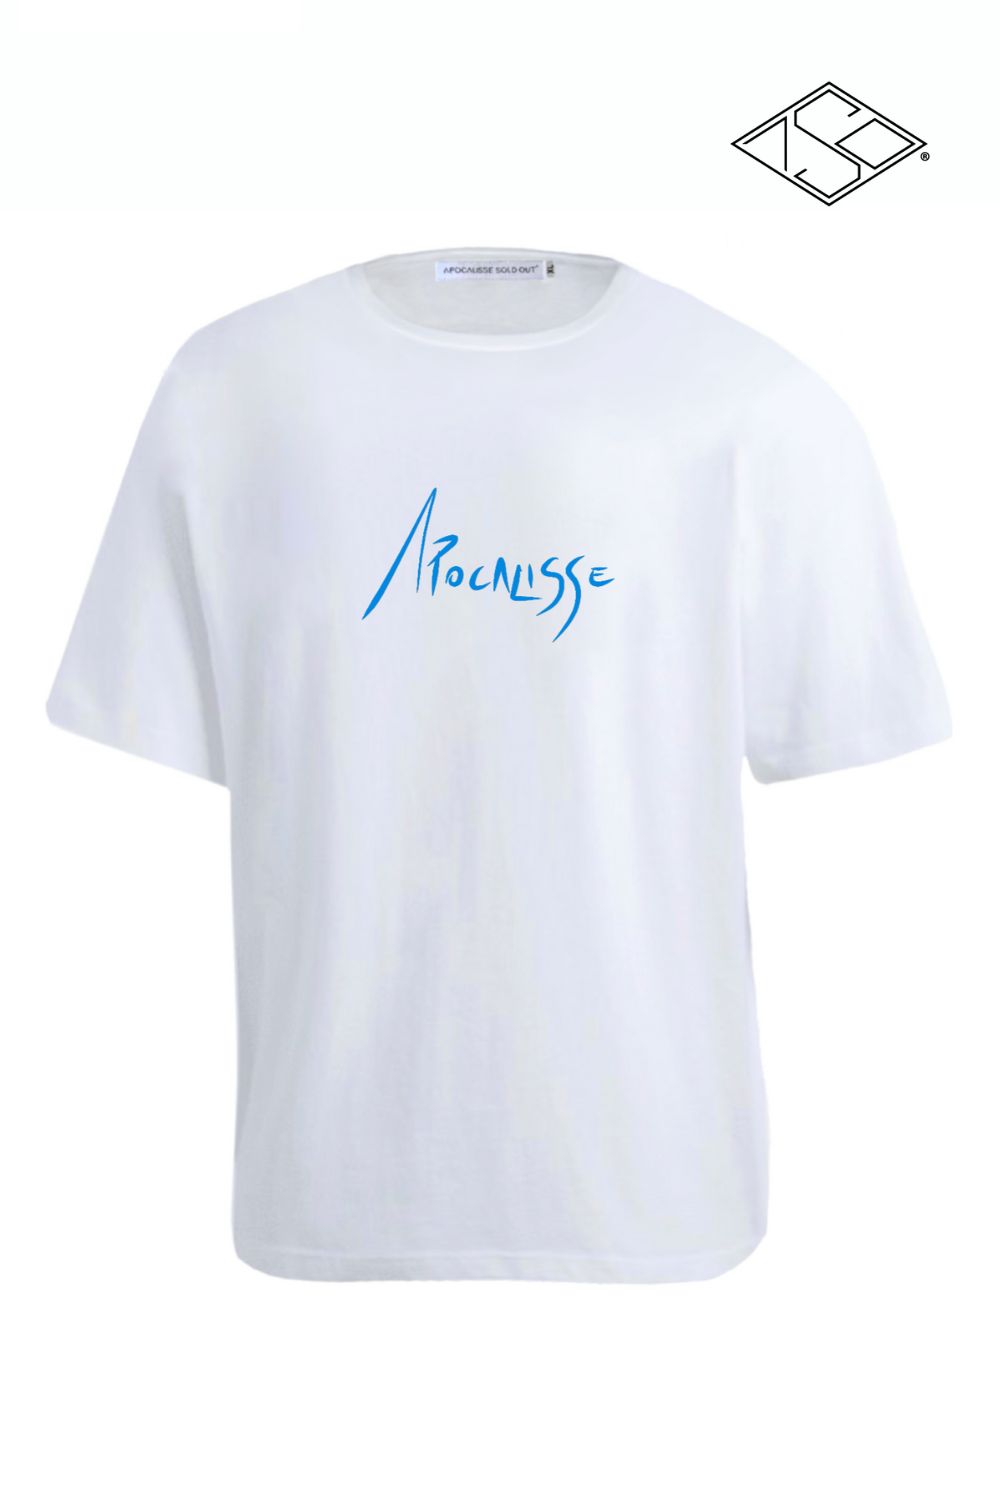 Apocalisse Basic edition light blue print white tshirt by ApocalisseSoldOut® Fashion Brand